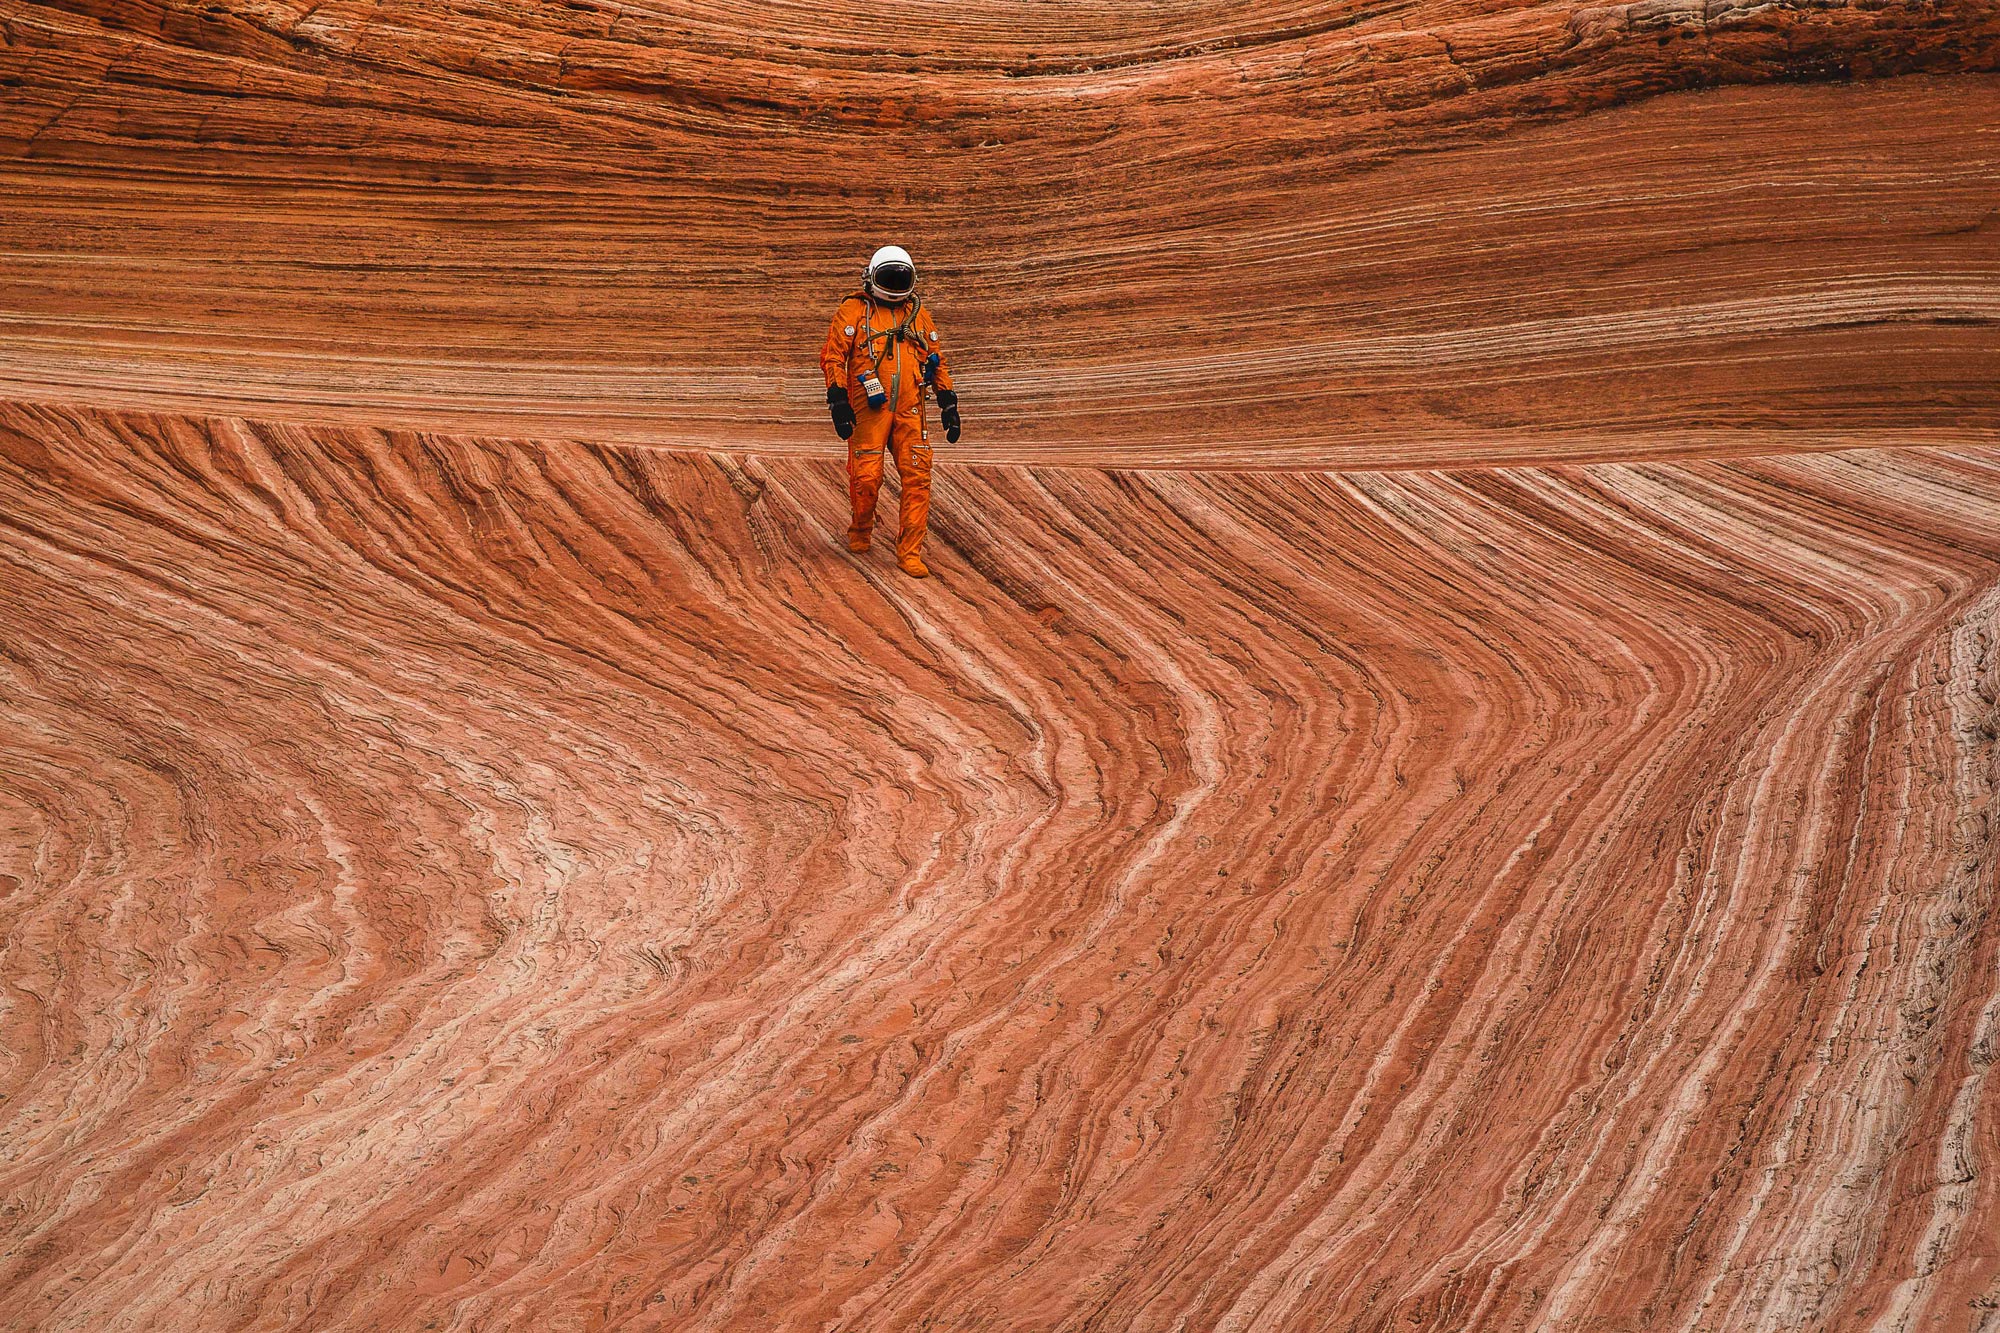 An astronaut walking on the mars-like landscape of the desert in the American Southwest